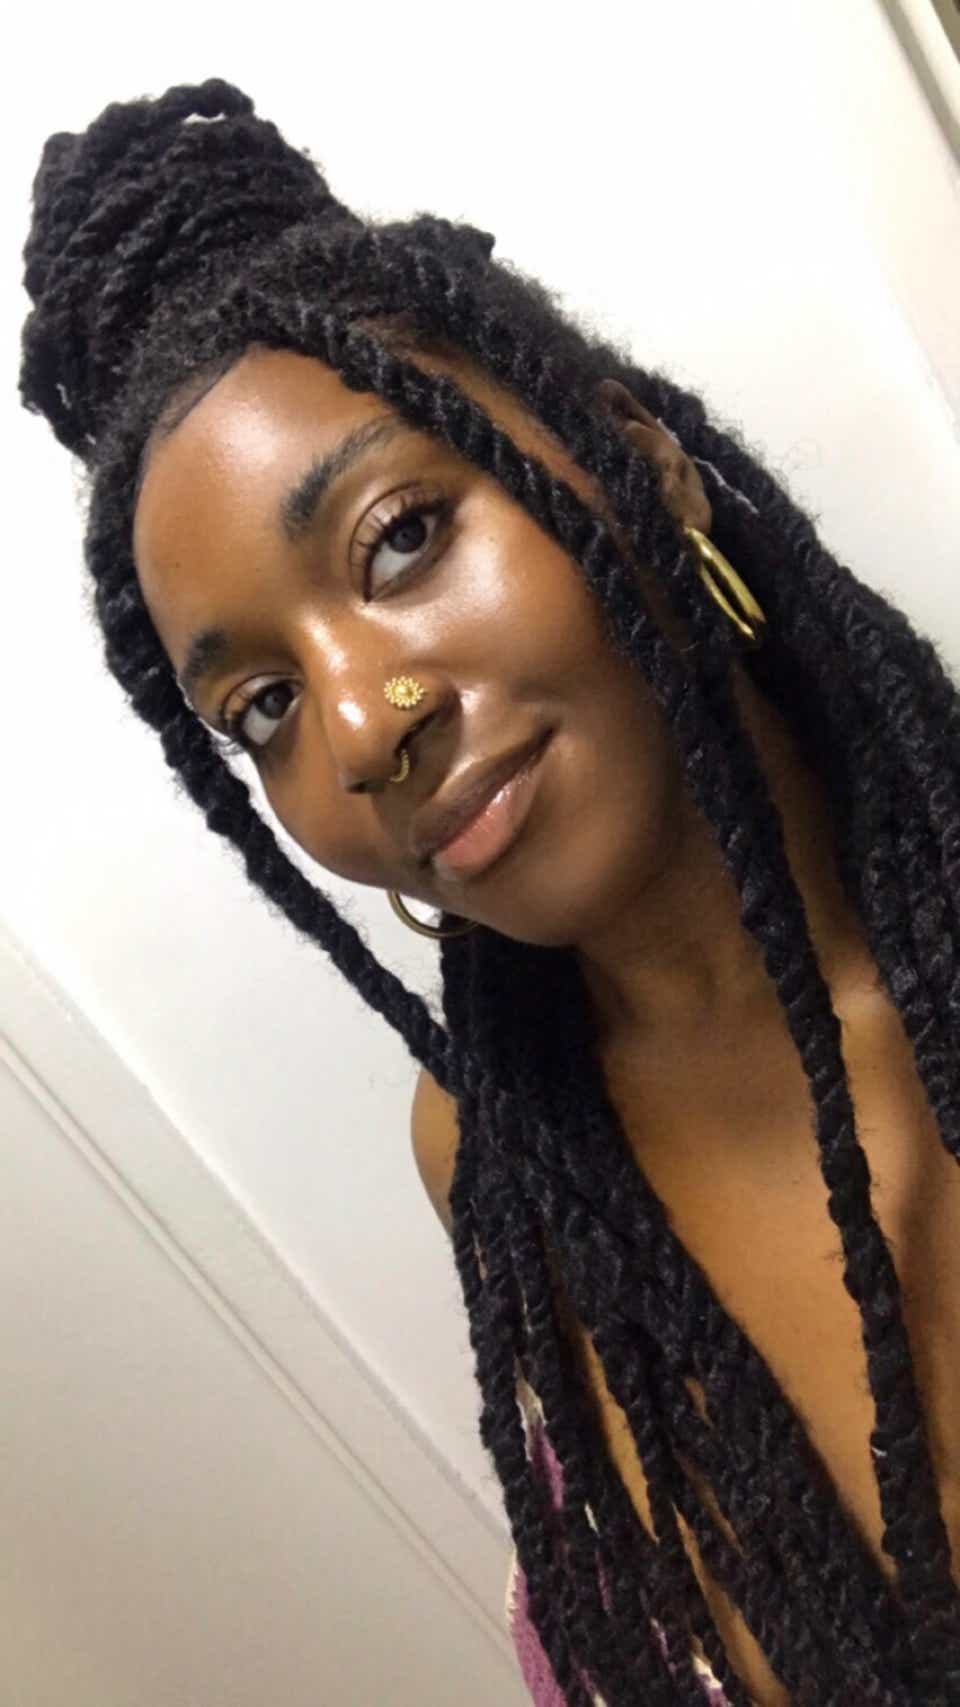 Learning To Braid My Own Hair Isn't Just About Beauty